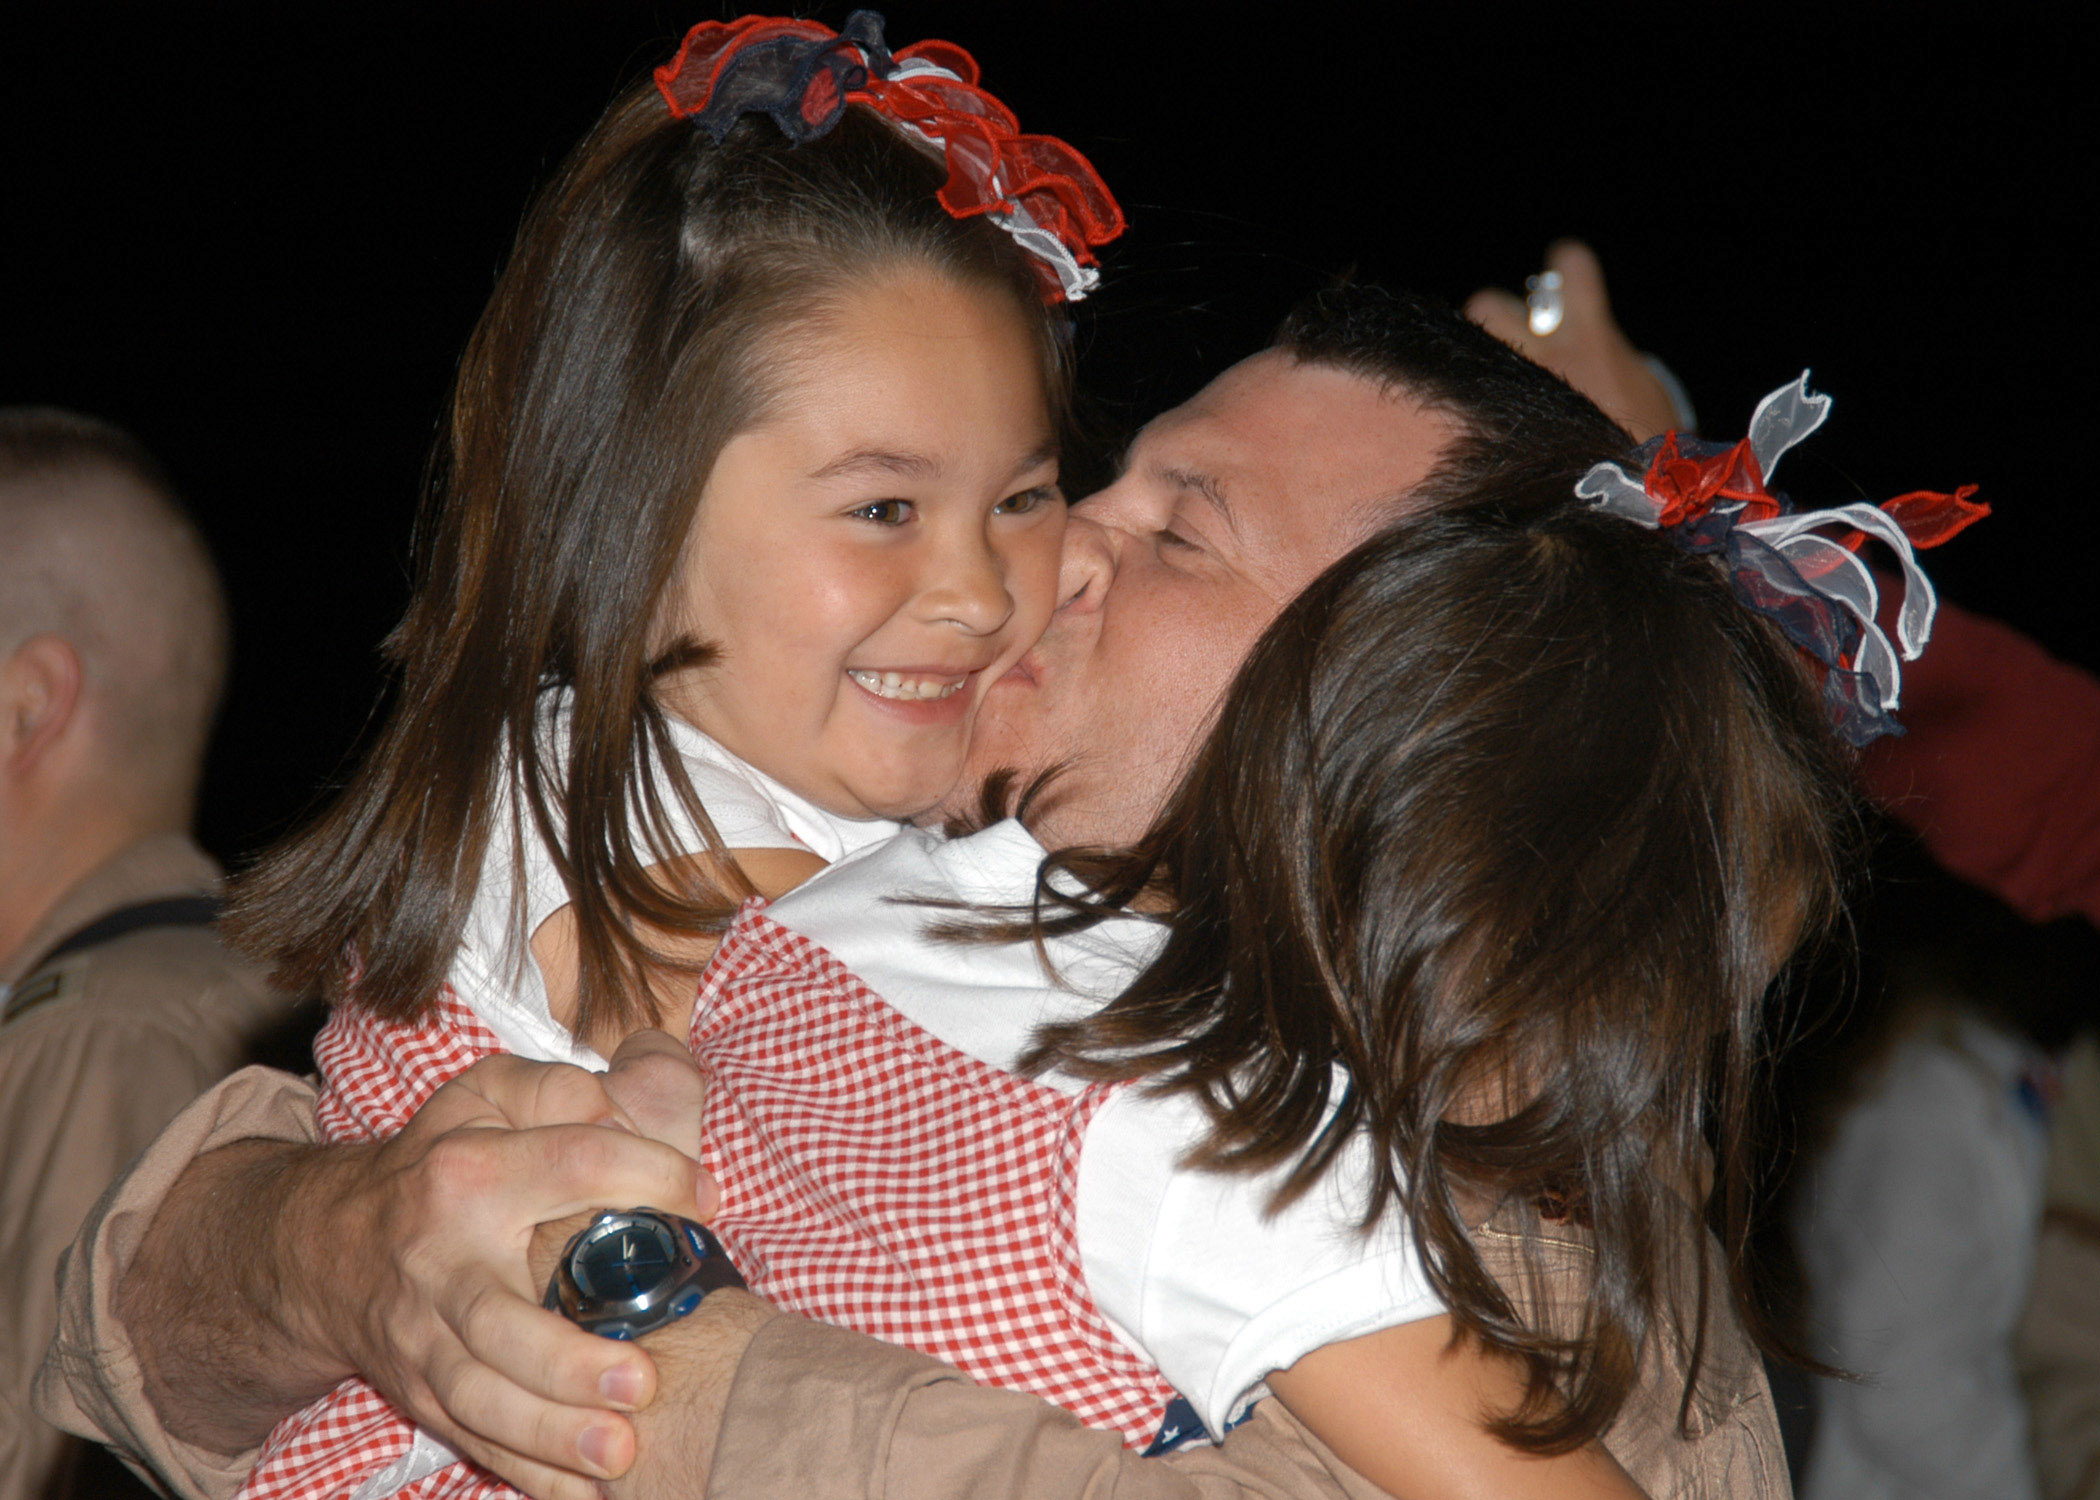 US Navy 070730-N-9860Y-019 Lt. Cmdr. Joe Vandelac, of St. Paul, Minn., kisses his daughters as the Electronic Attack Squadron (VAQ) 134 is welcomed back to Naval Air Station (NAS) Whidbey Island